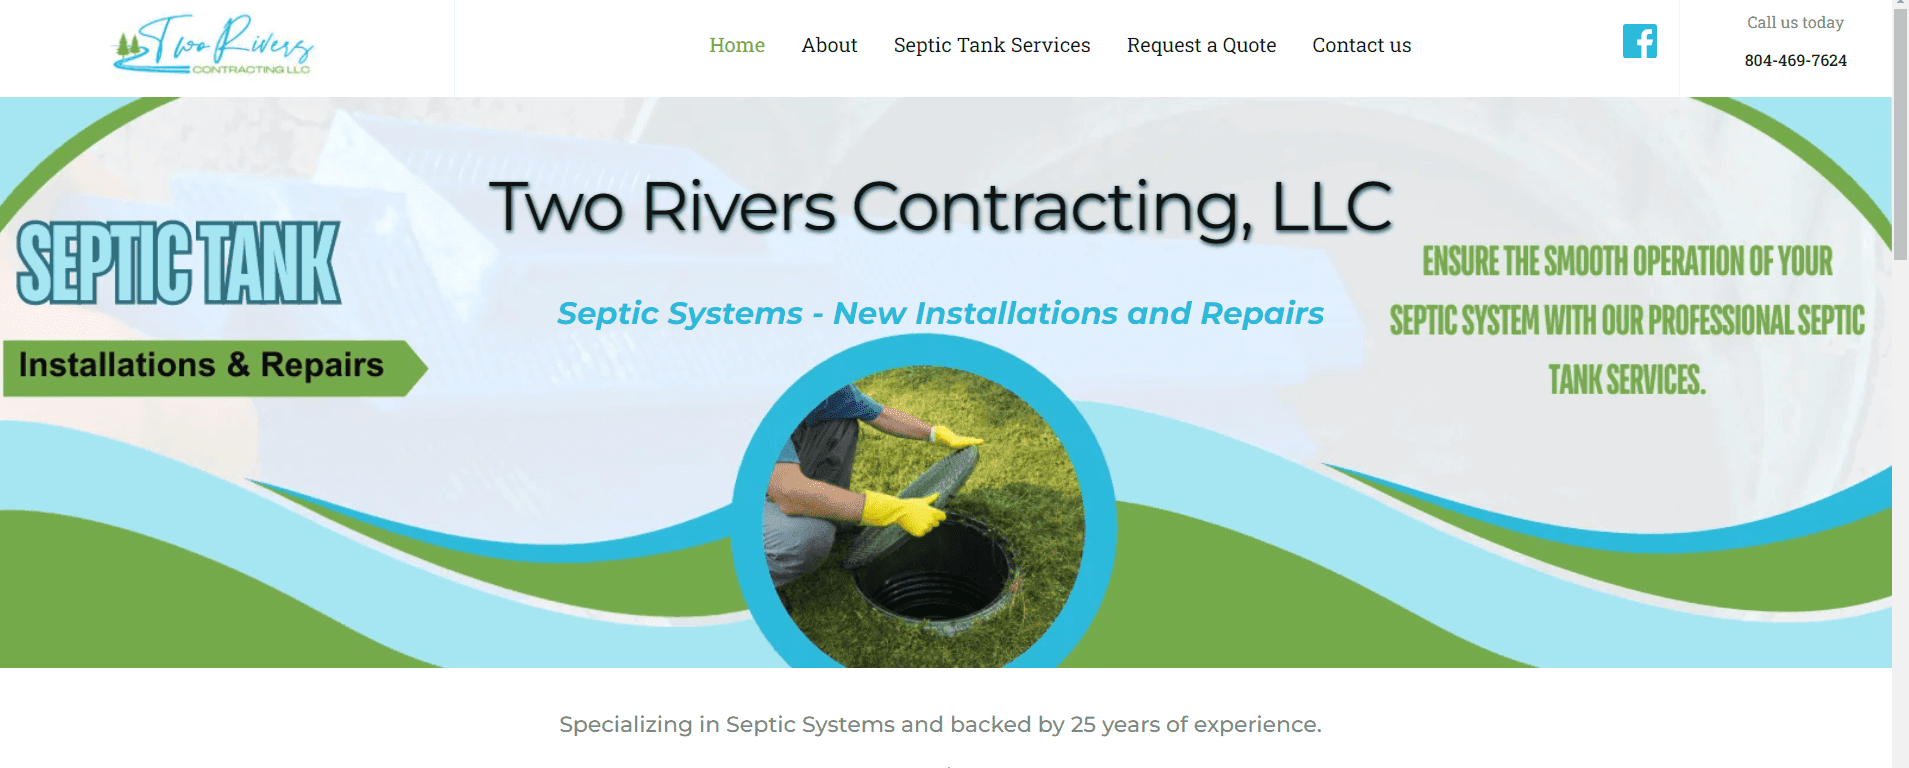 Two Rivers Contracting, LLC